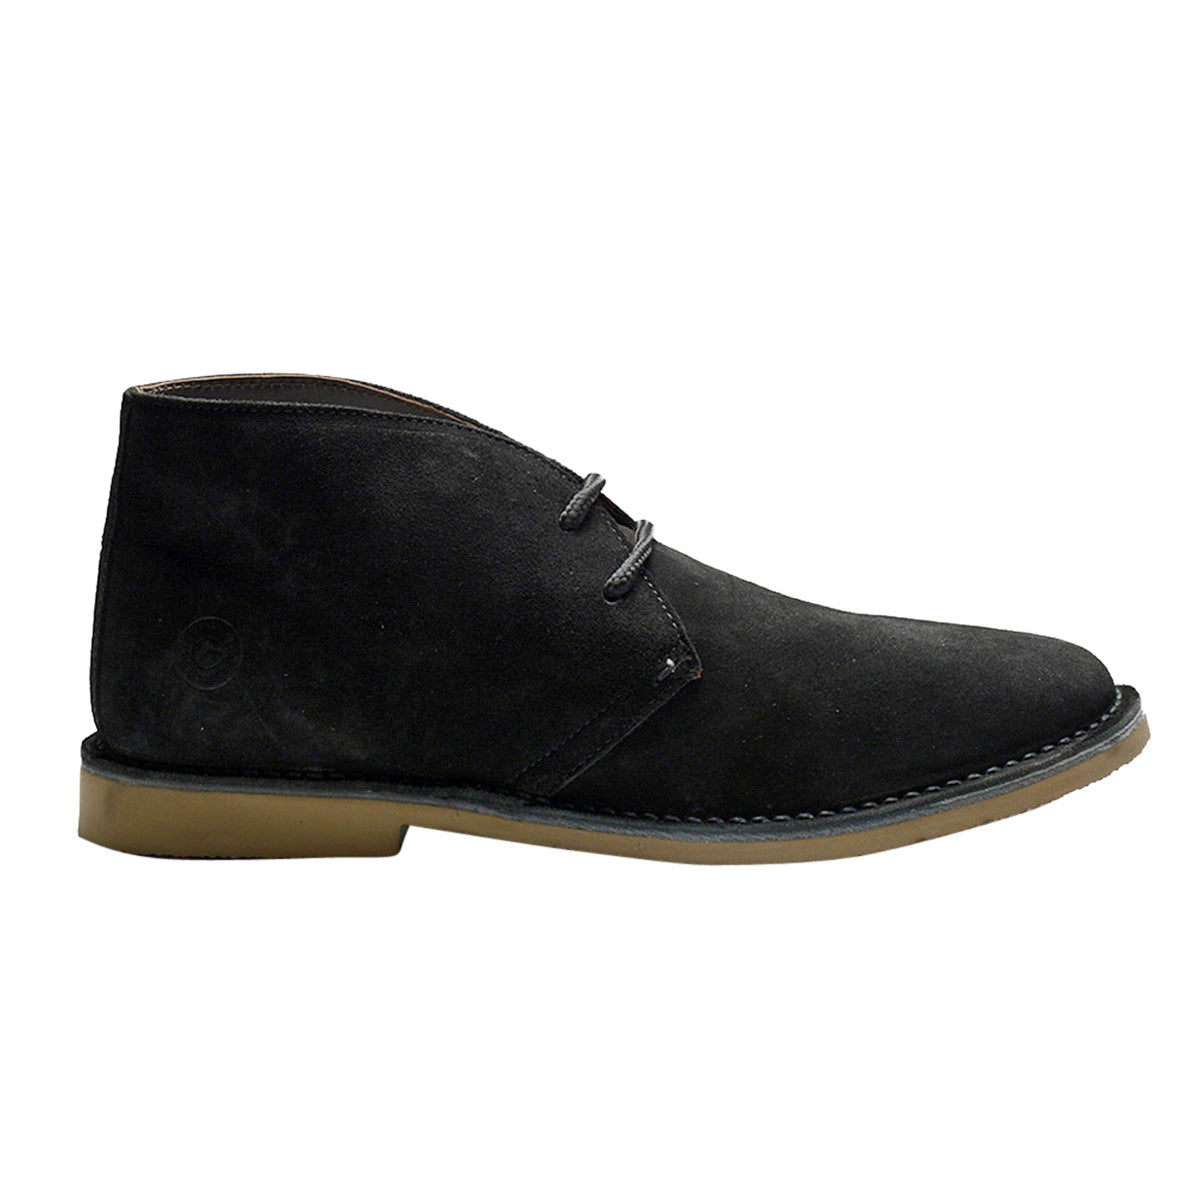 Men Suede Leather Chukka Boots ǀ Laurence 5351